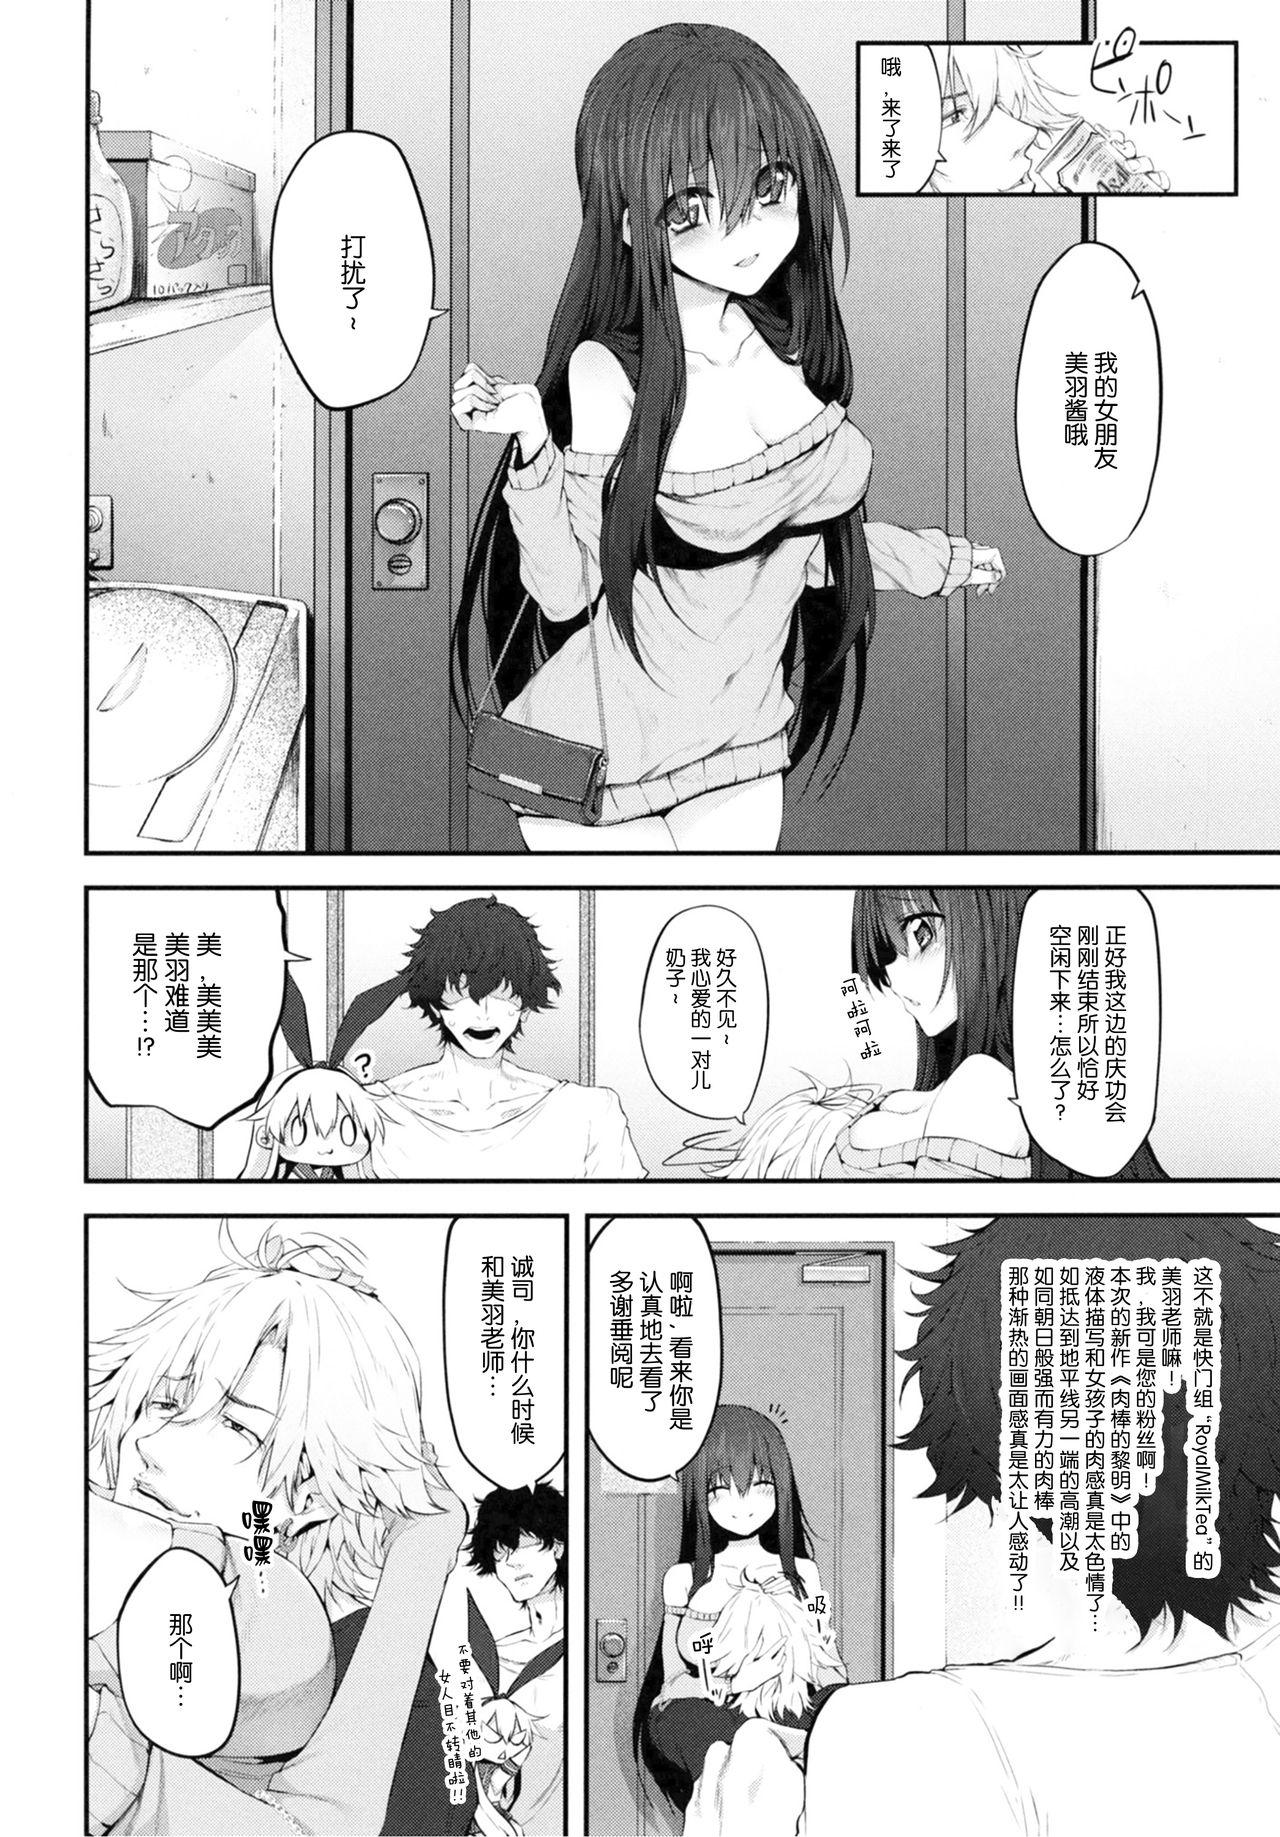 Russia COSBITCH! Marked-girls Origin Vol. 1 - Kantai collection Asians - Page 6